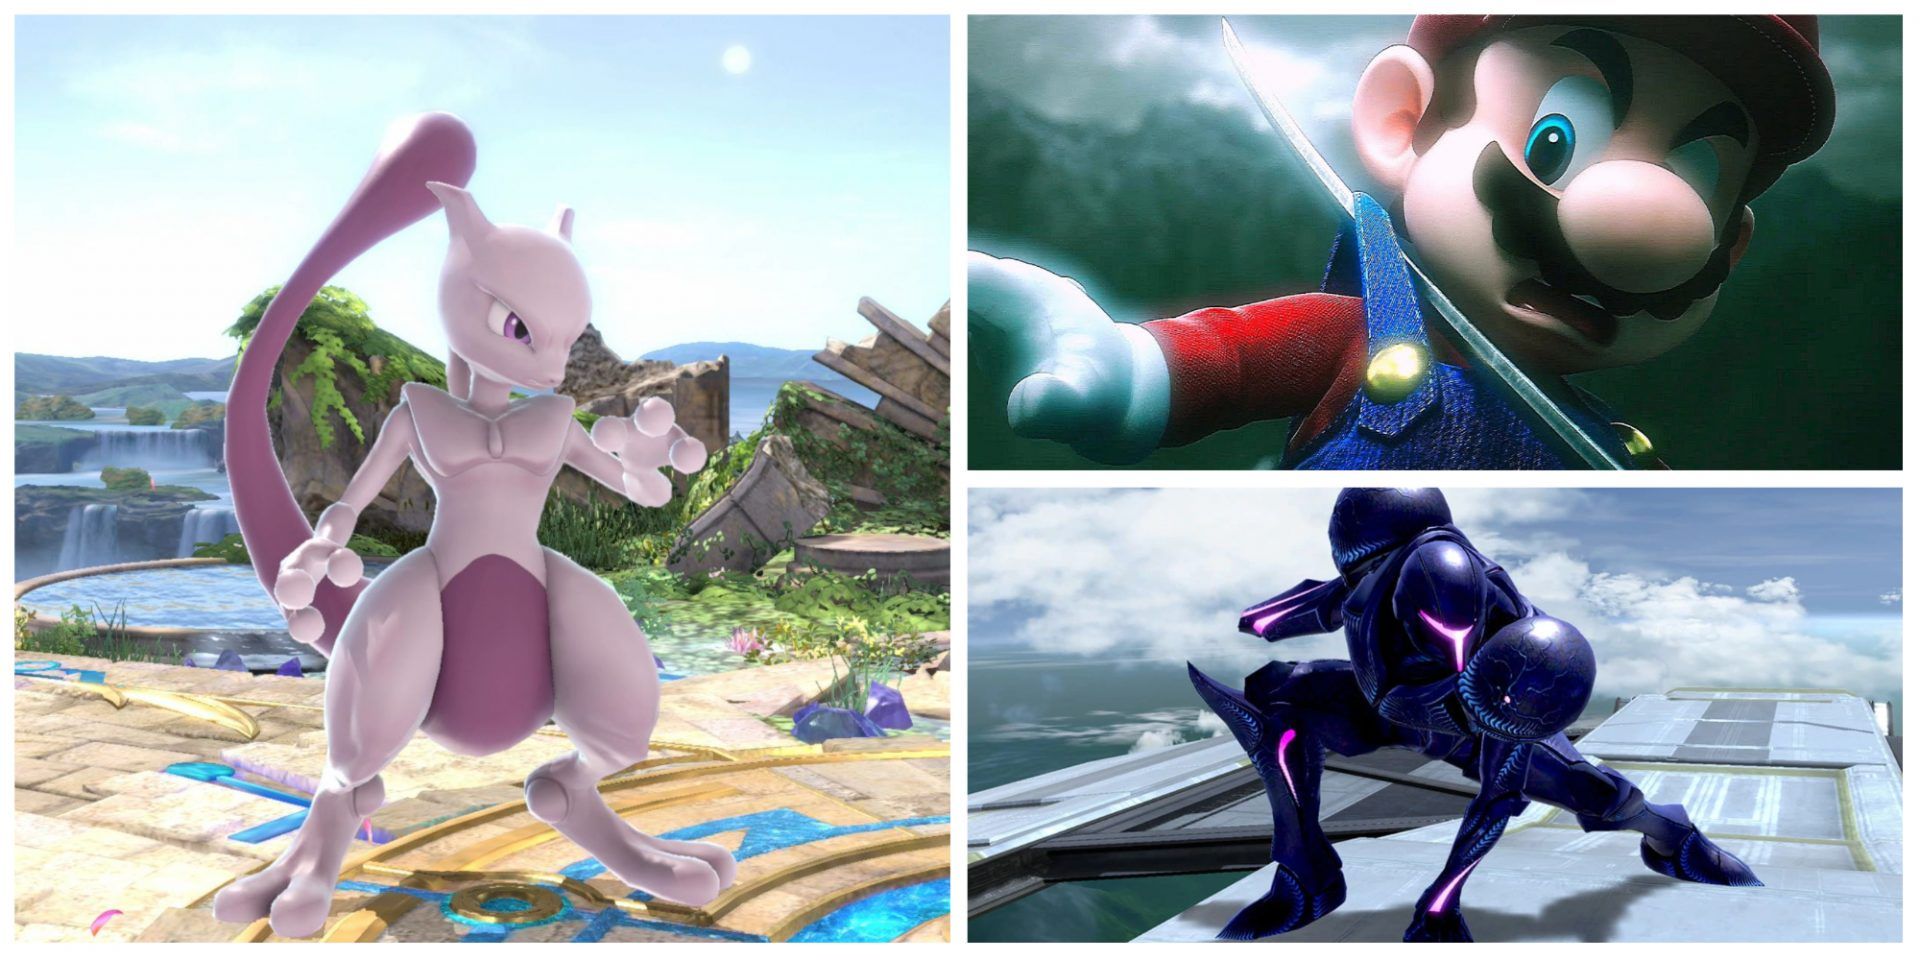 Mewtwo and Dark Samus prepare for war as Mario finds himself on the end of Sephiroth's sword